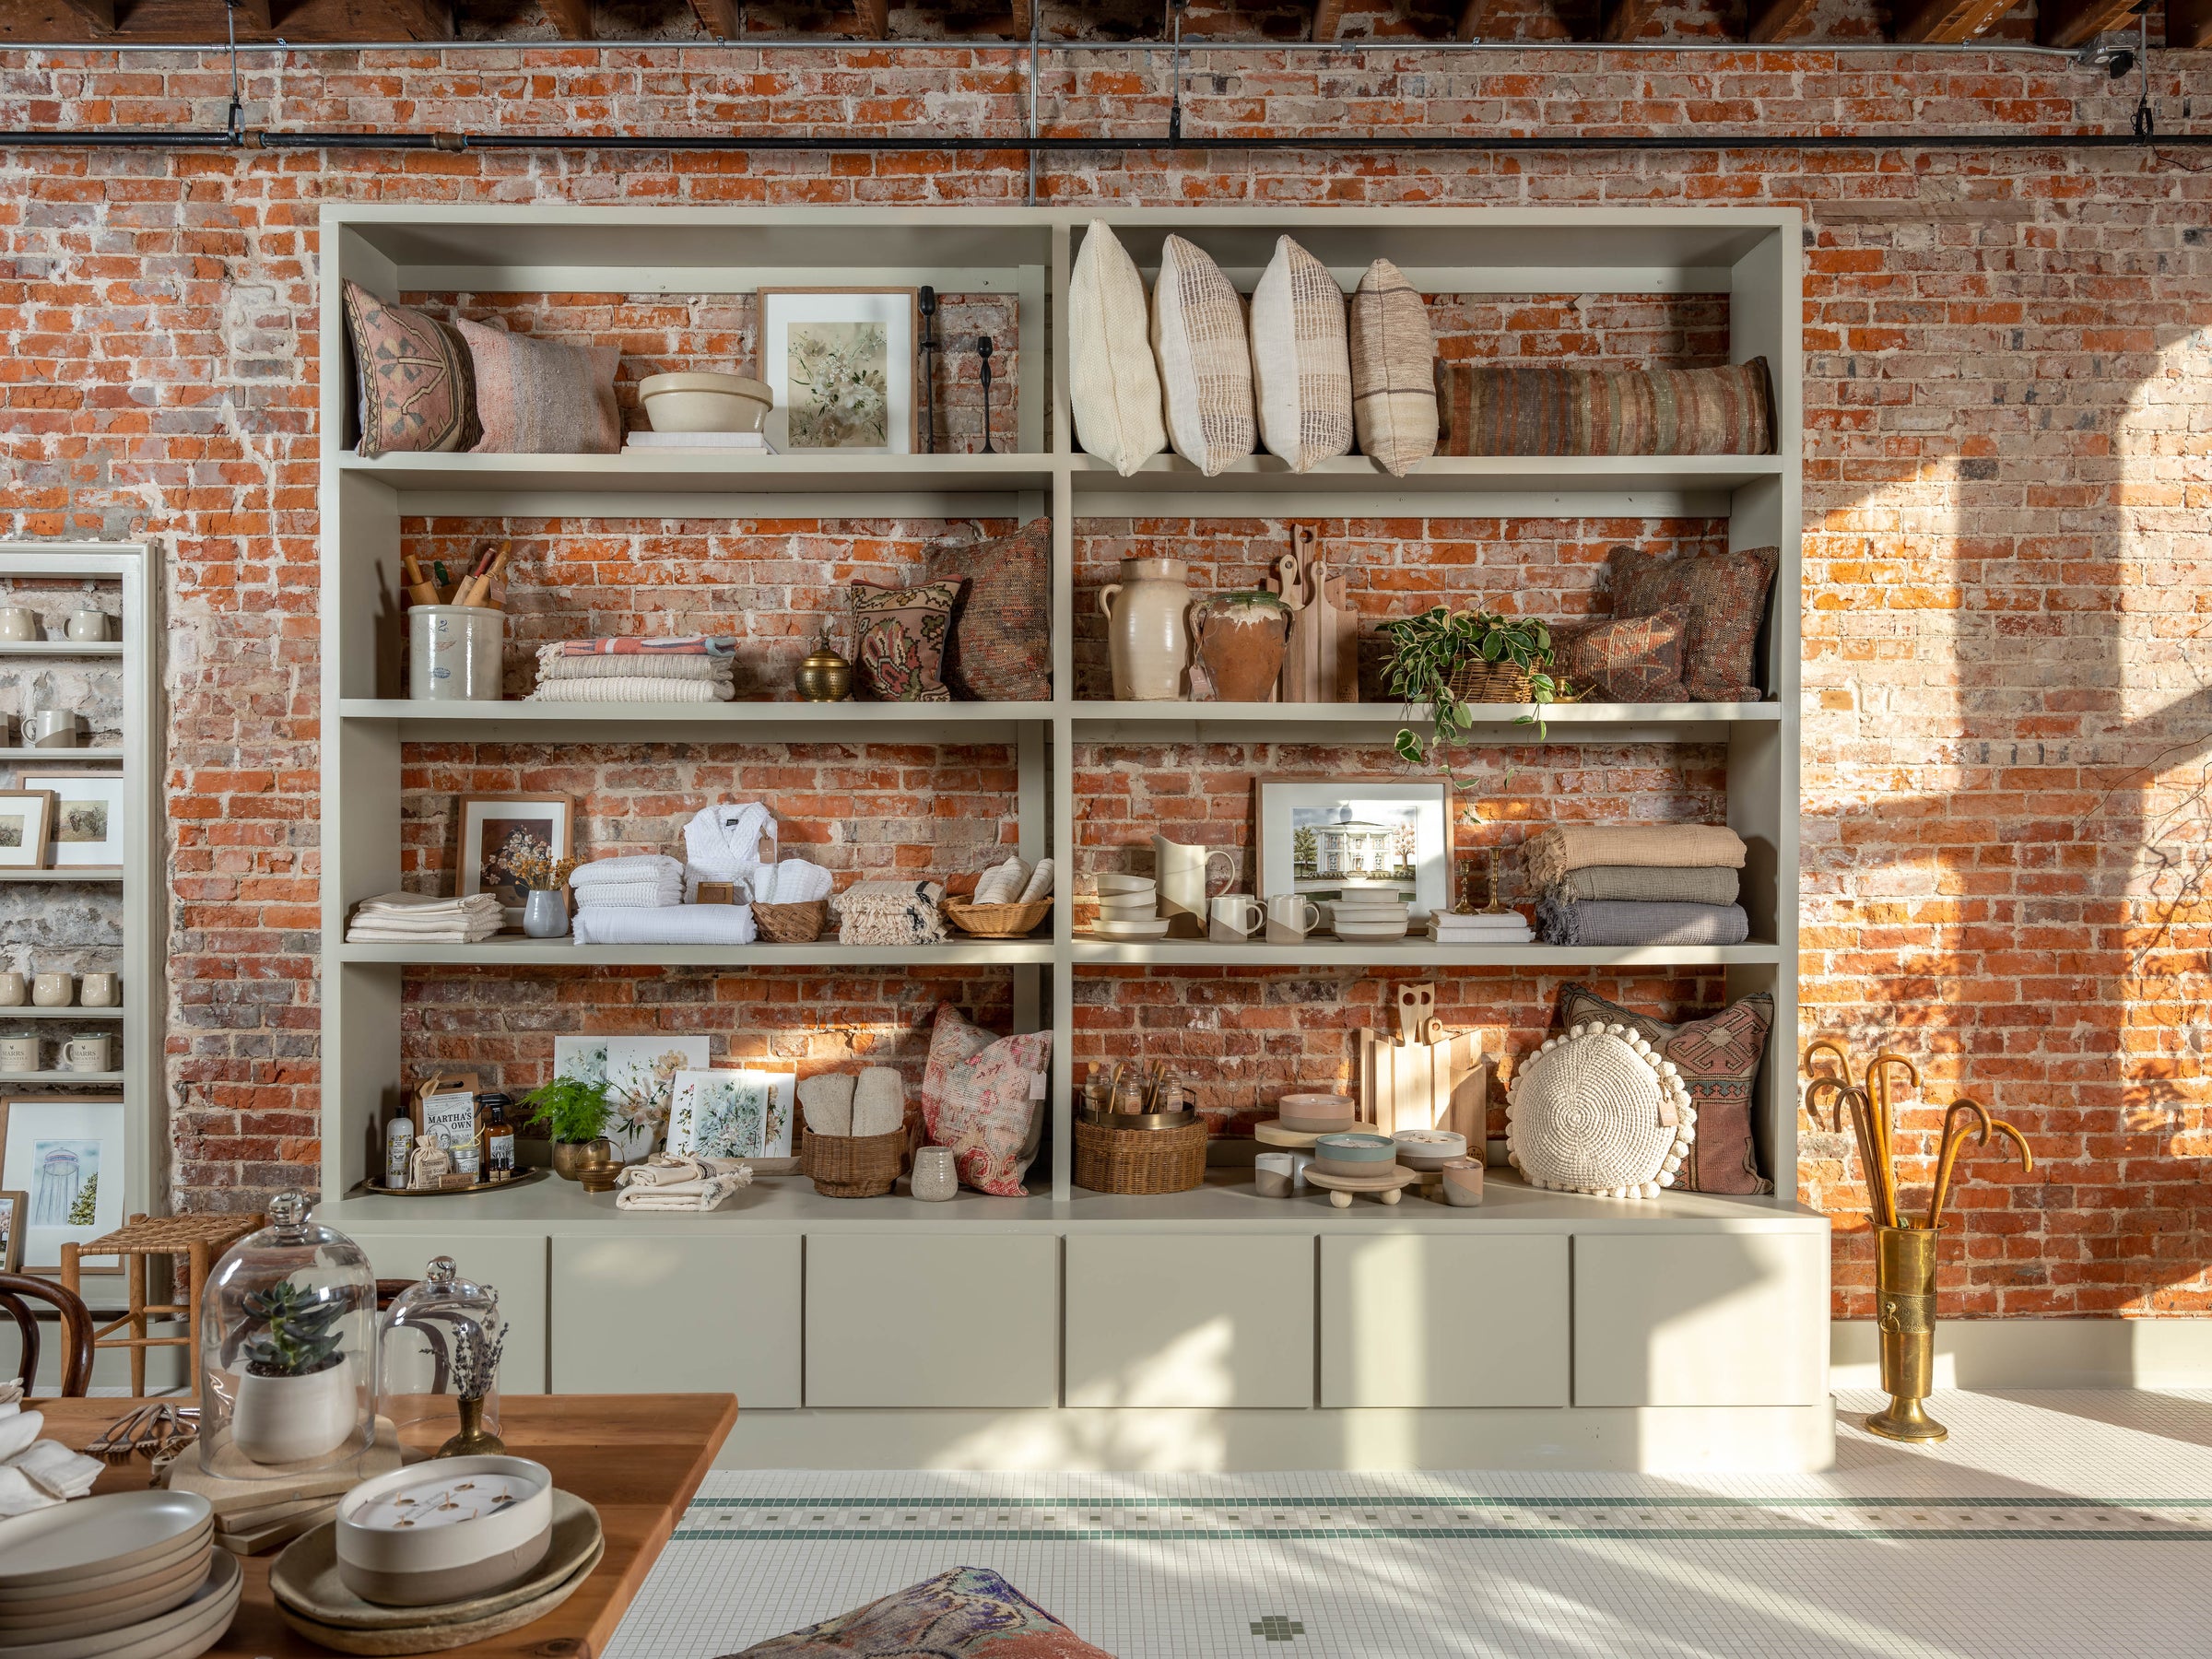 Small Kitchen Design at the Mercantile!